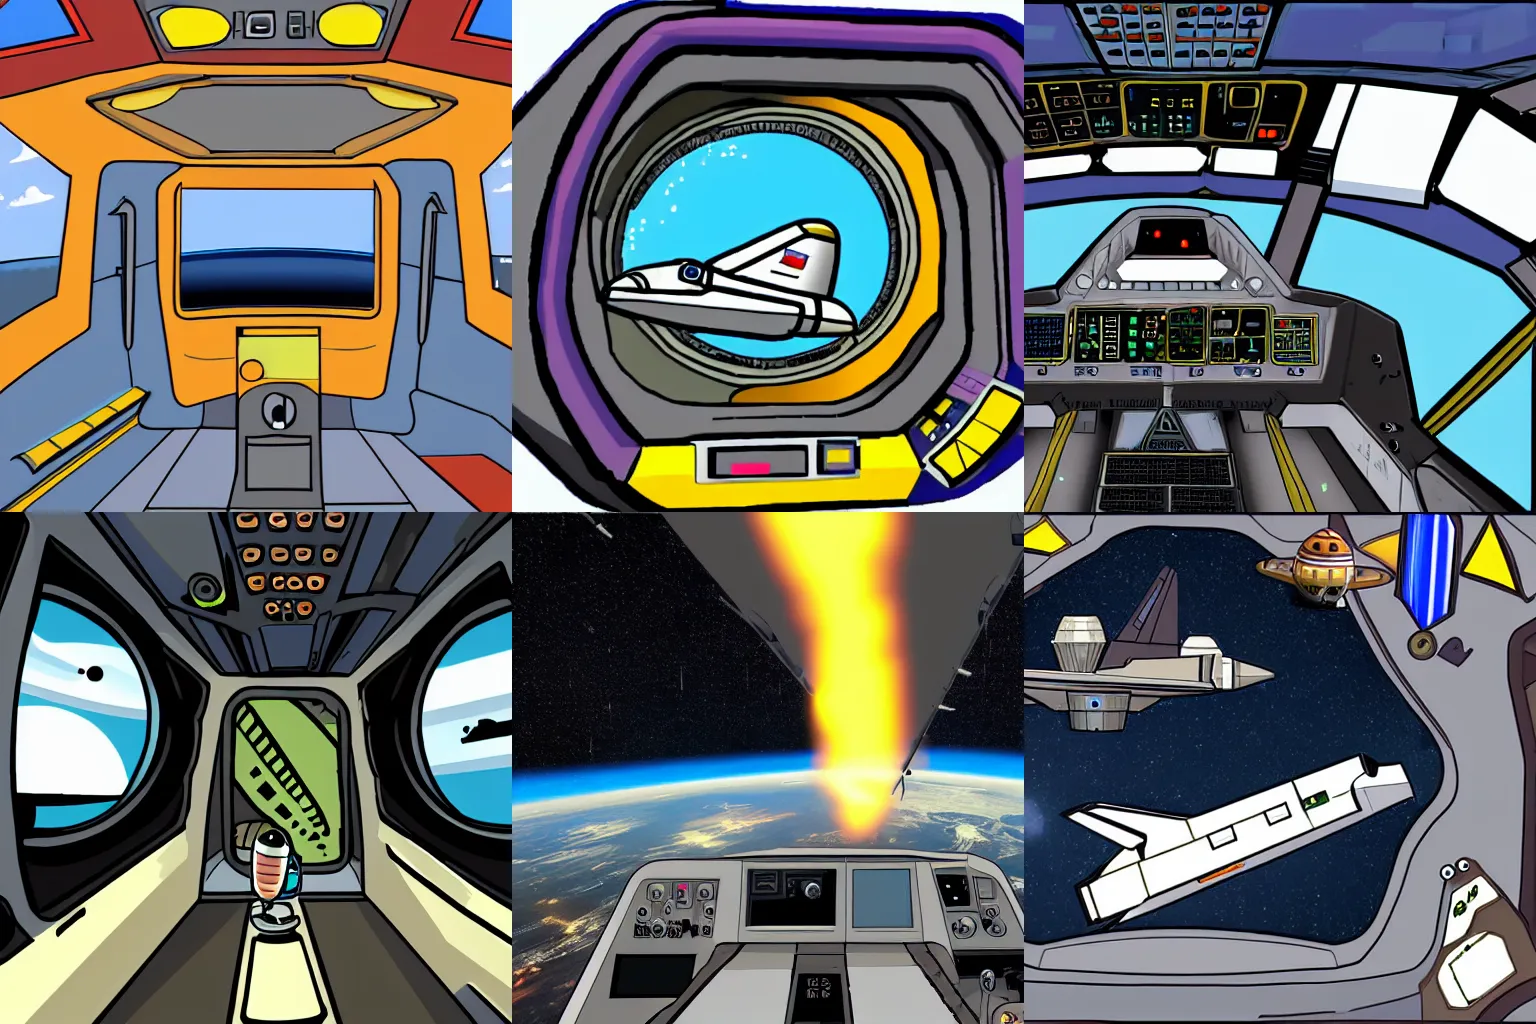 Prompt: view from the cockpit of a small space shuttle, from a space themed Serria point and click 2D graphic adventure game, high quality cartoon style graphics